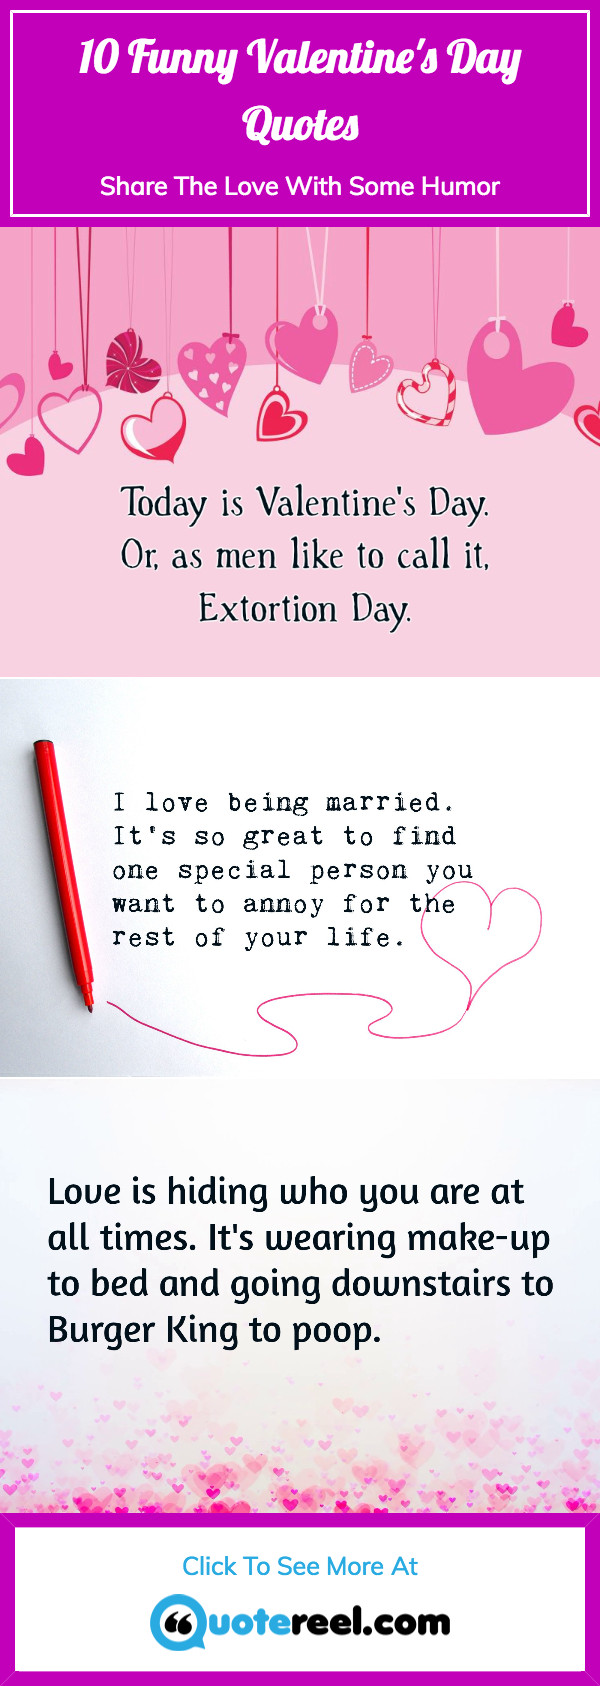 Valentines Day Funny Quotes
 Funny Valentine s Quotes That Add A Bit Humor To The